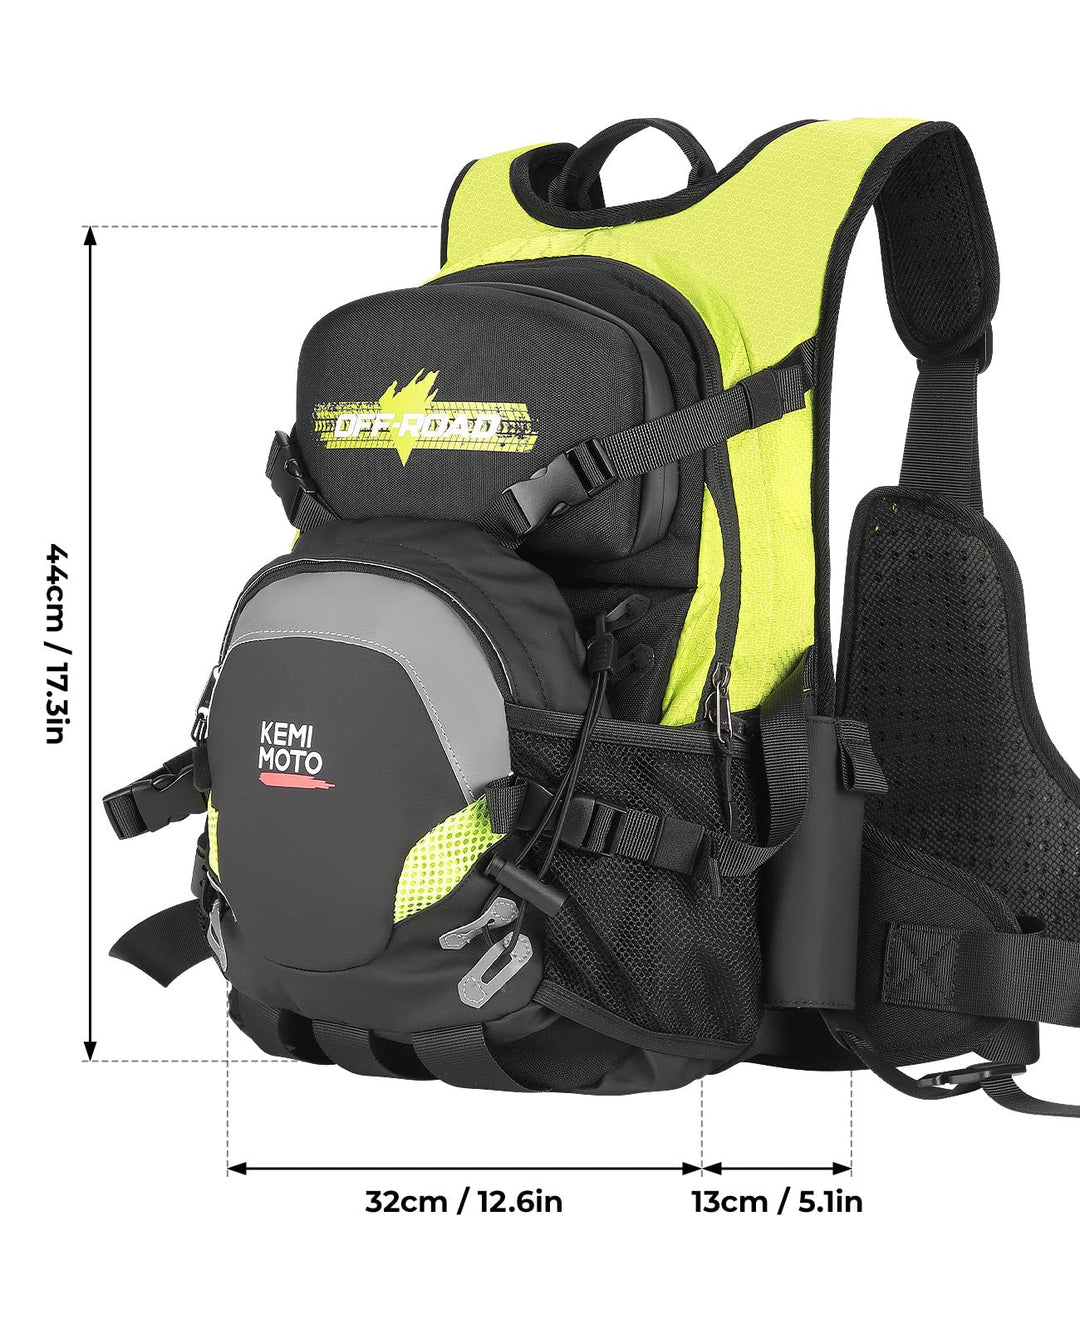 15L Motorcycle Backpack with 3L Hydration Pack